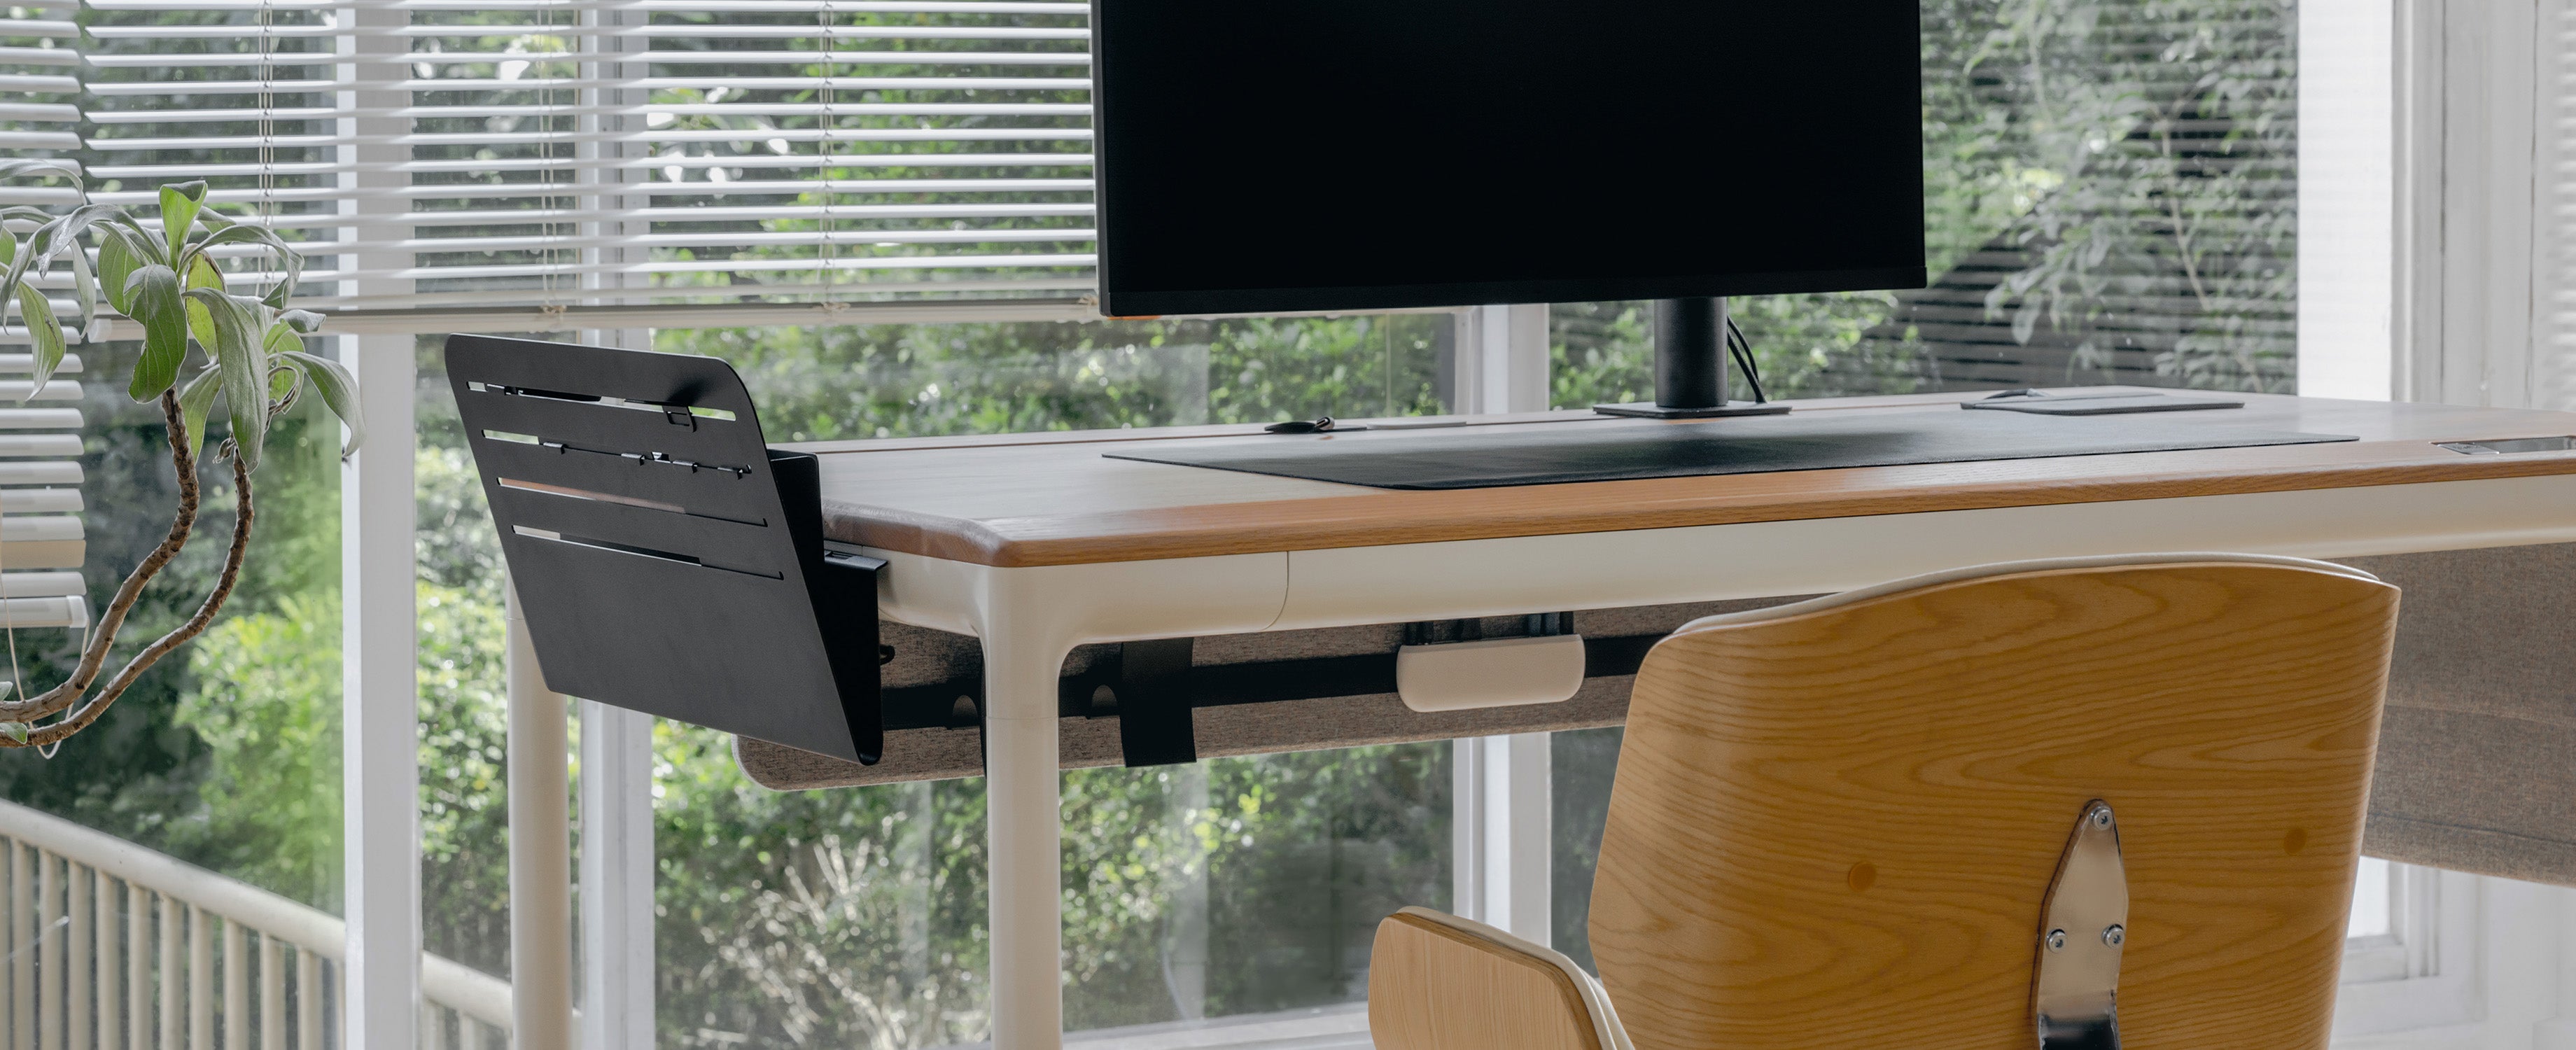 Get More Done With the 20 Best Home Office Accessories for 2020